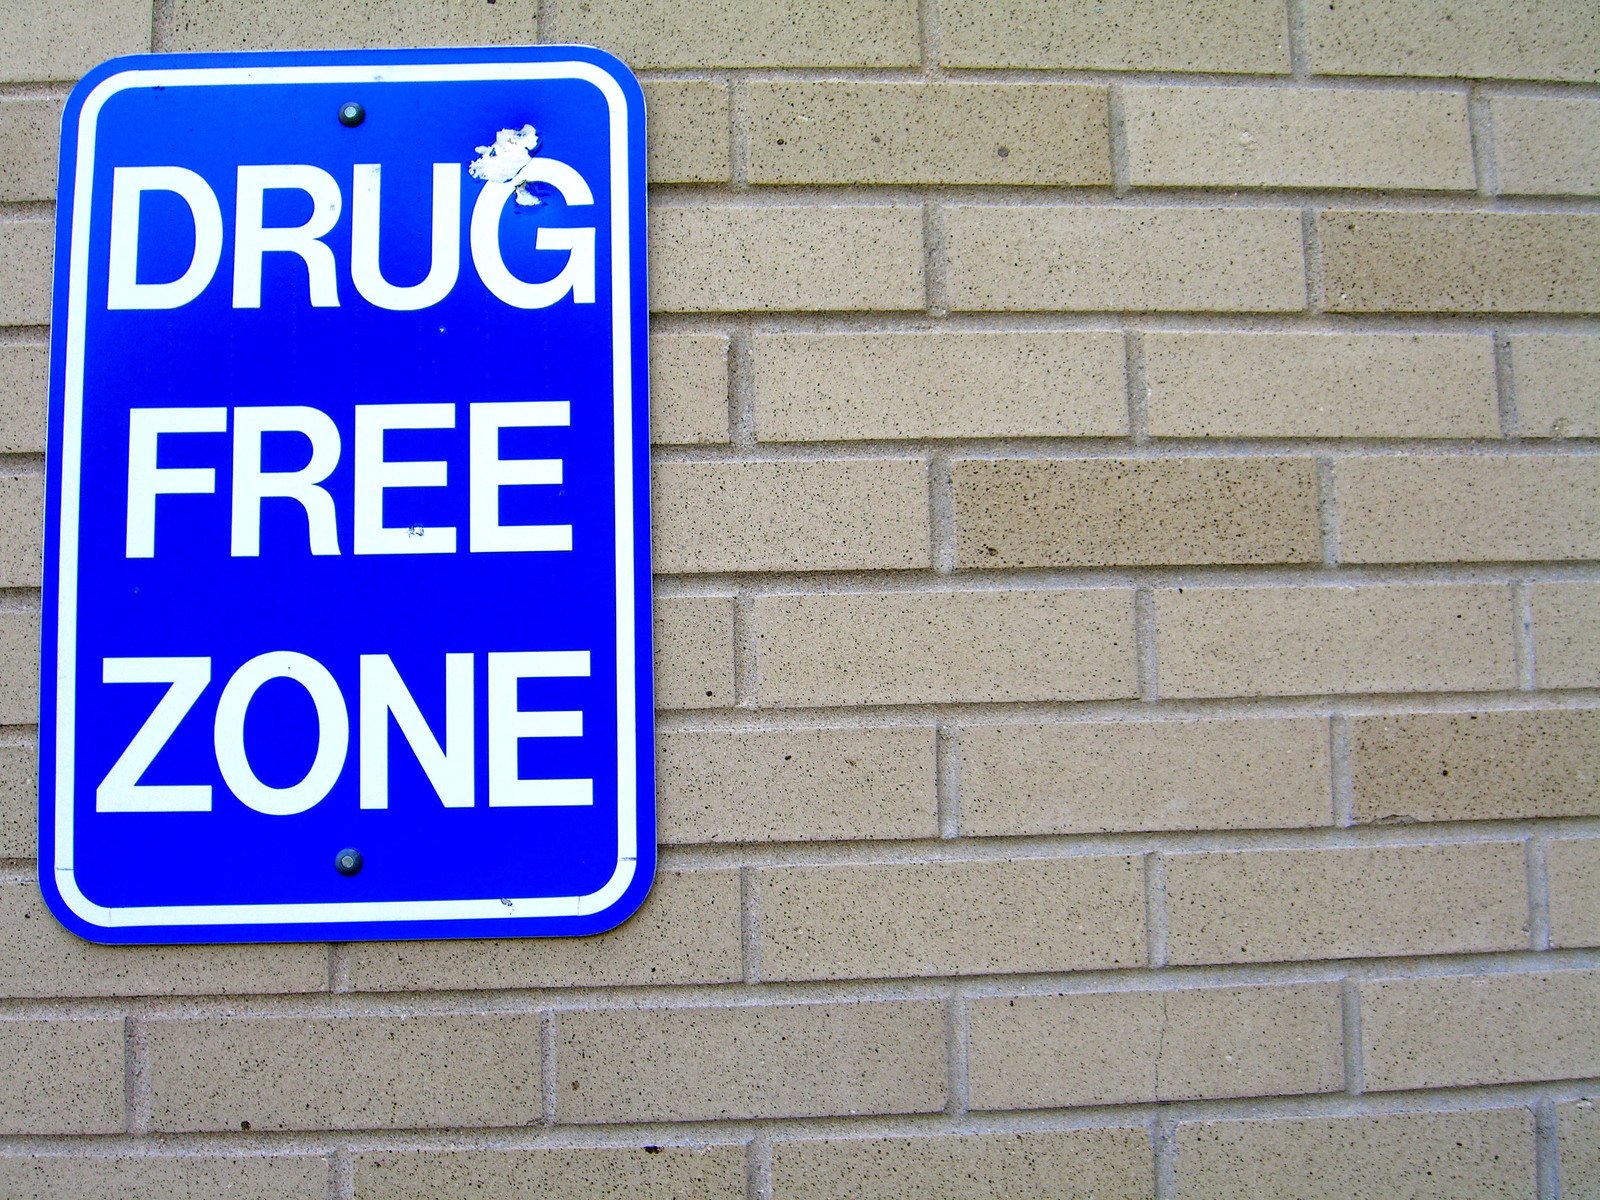 the blue sign is for drug free zone on a wall